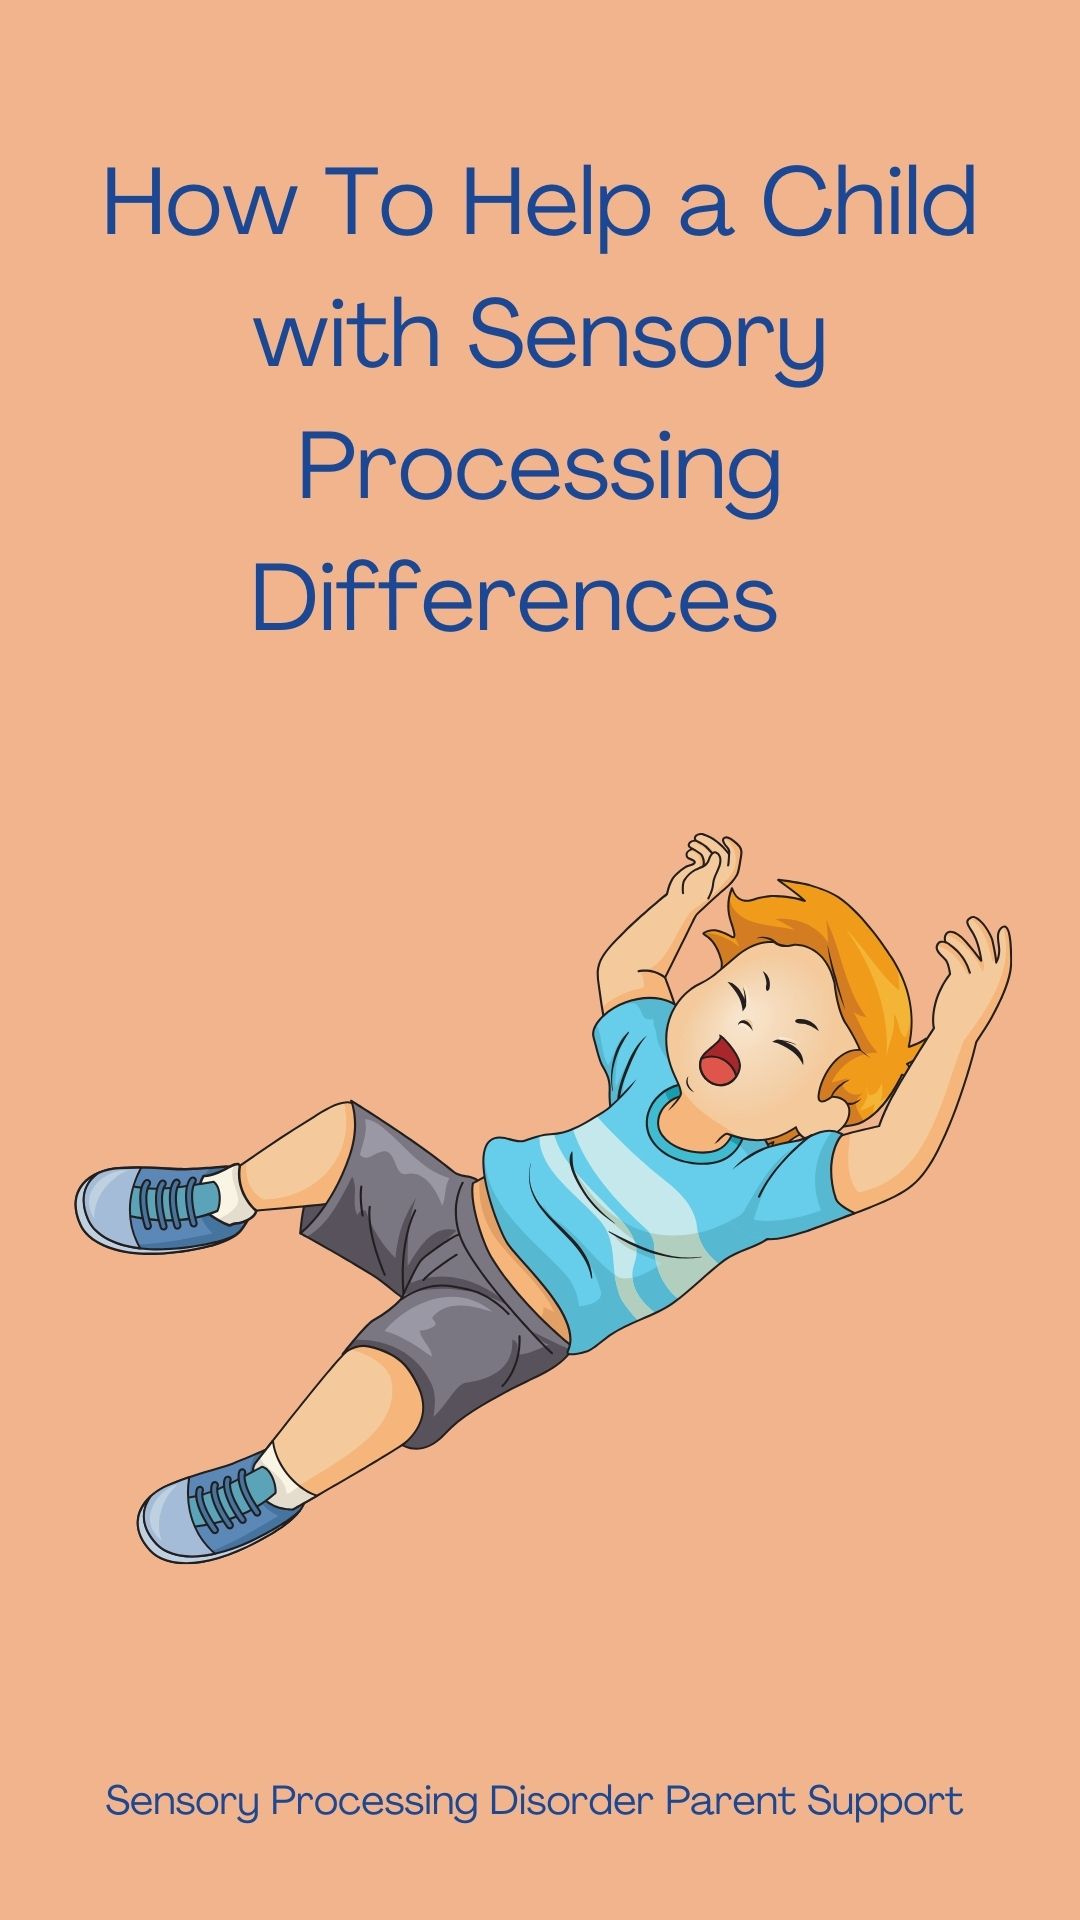 How To Help a Child with Sensory Processing Differences